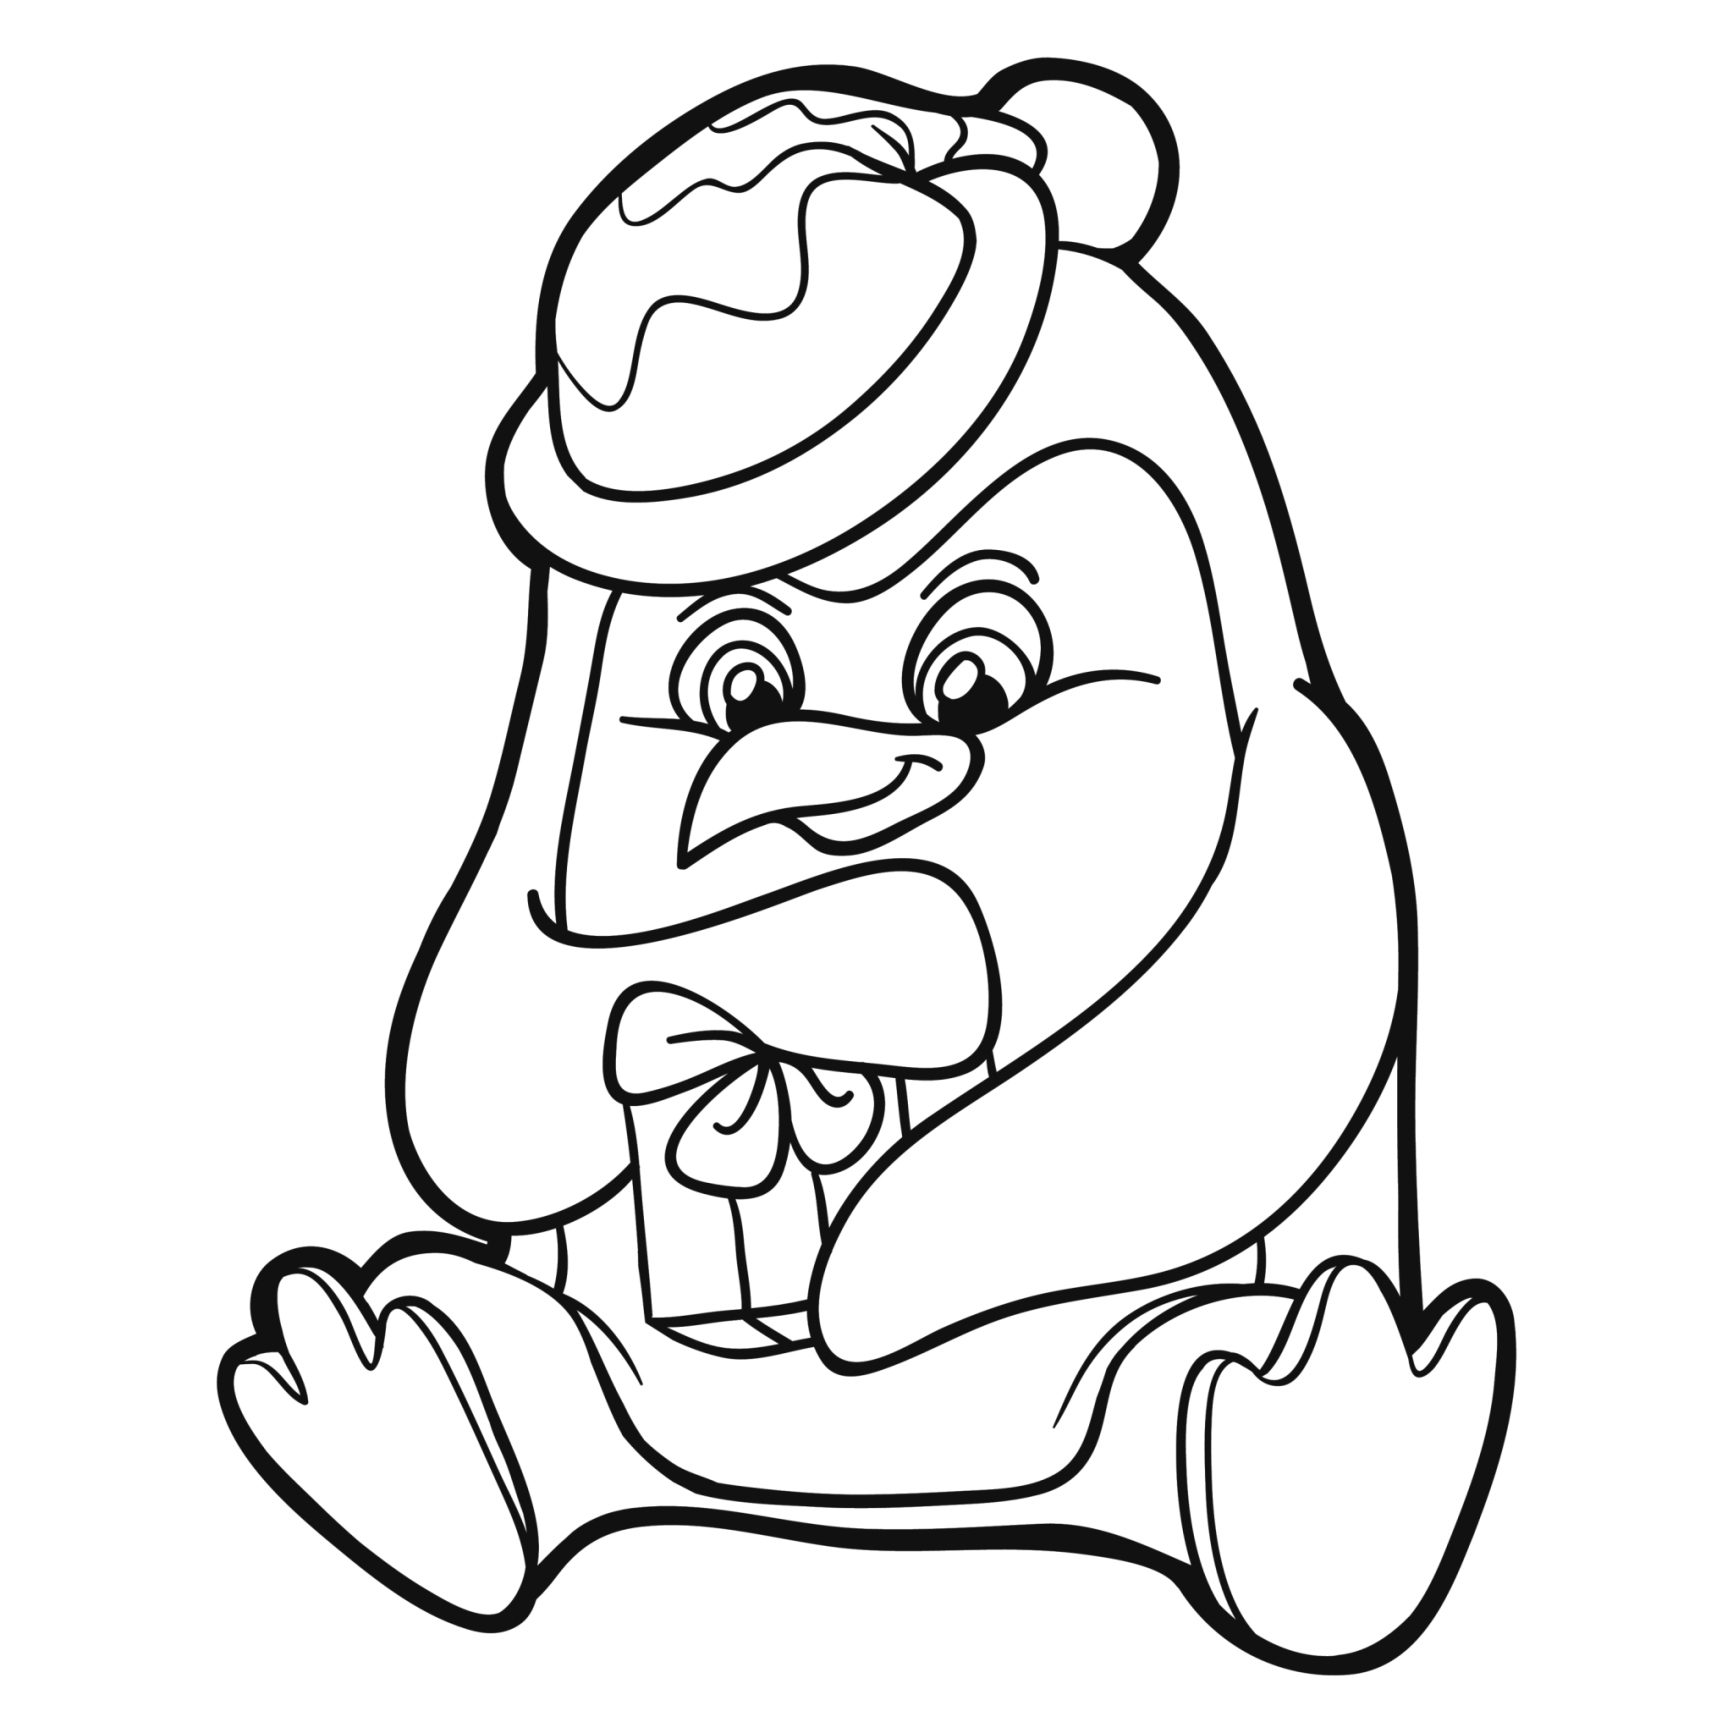 Penguin Christmas coloring page